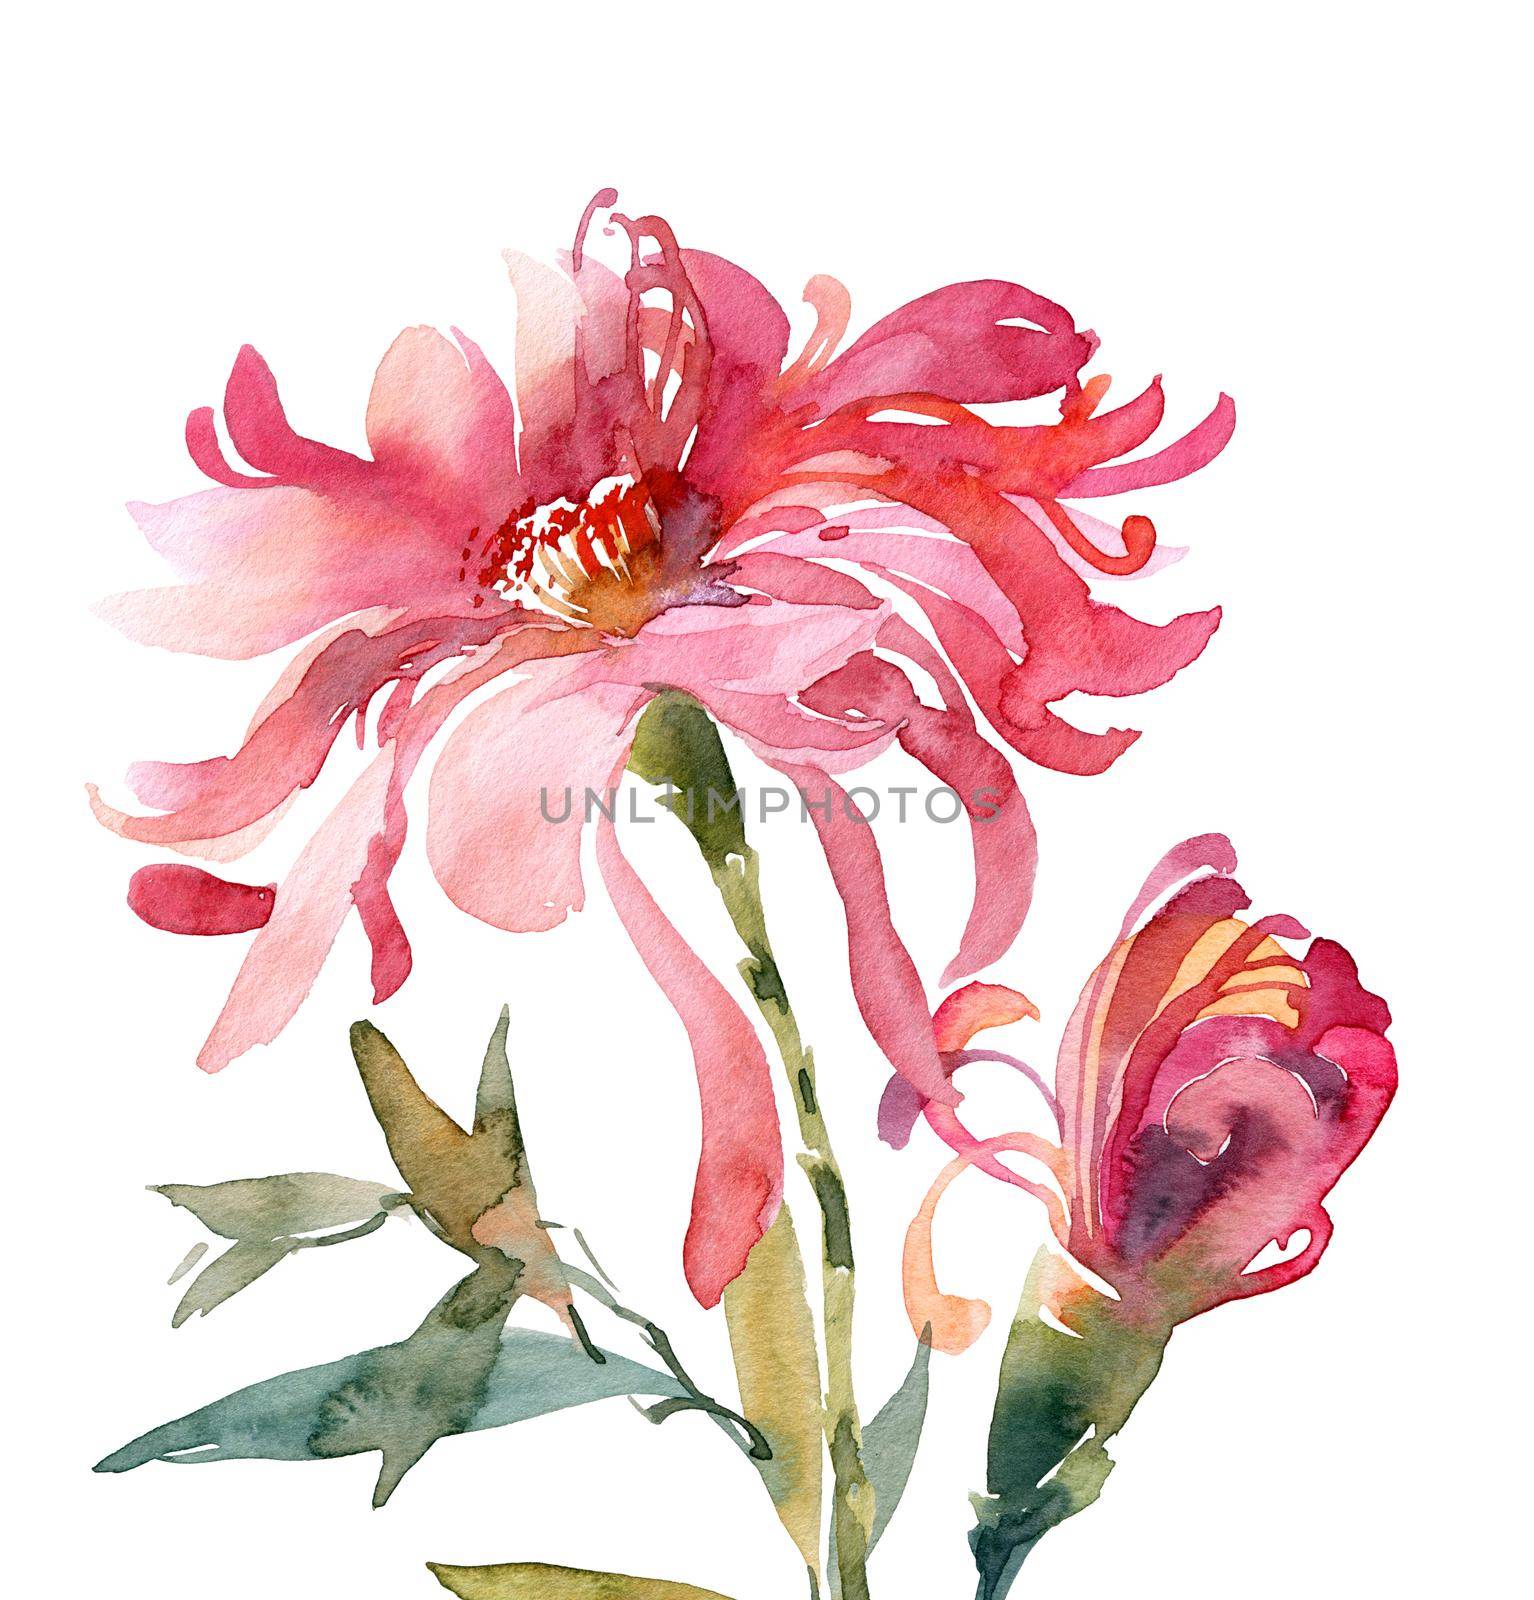 Watercolor illustration of chrysanthemum bouquet - pink flowers, leaves and bud